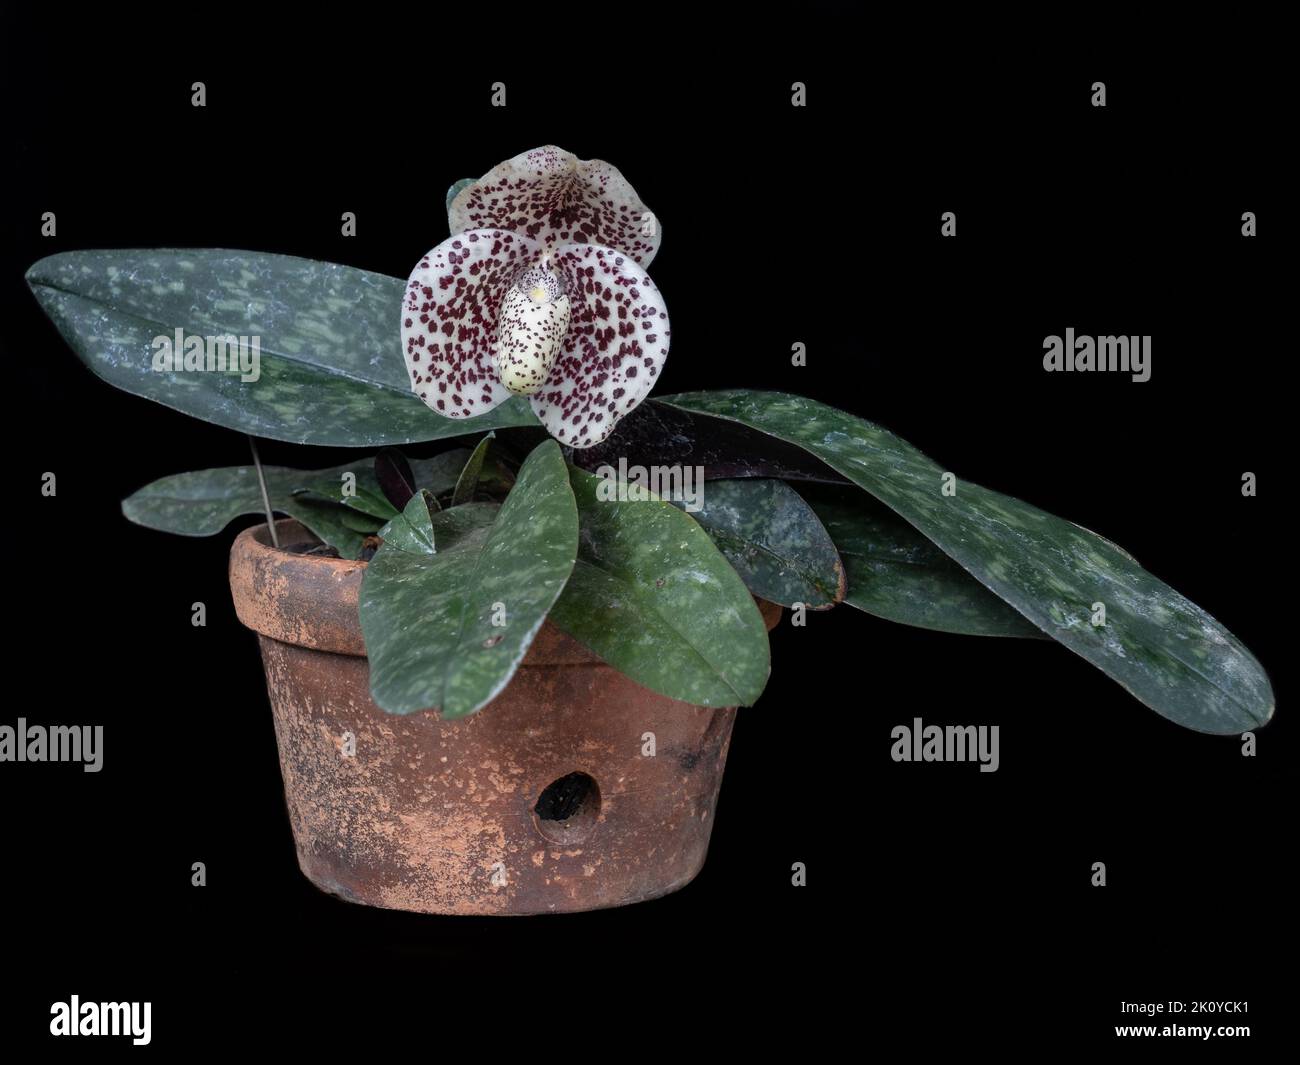 Beautiful lady slipper orchid species paphiopedilum bellatulum blooming with purple and white flower in clay pot isolated on black background Stock Photo